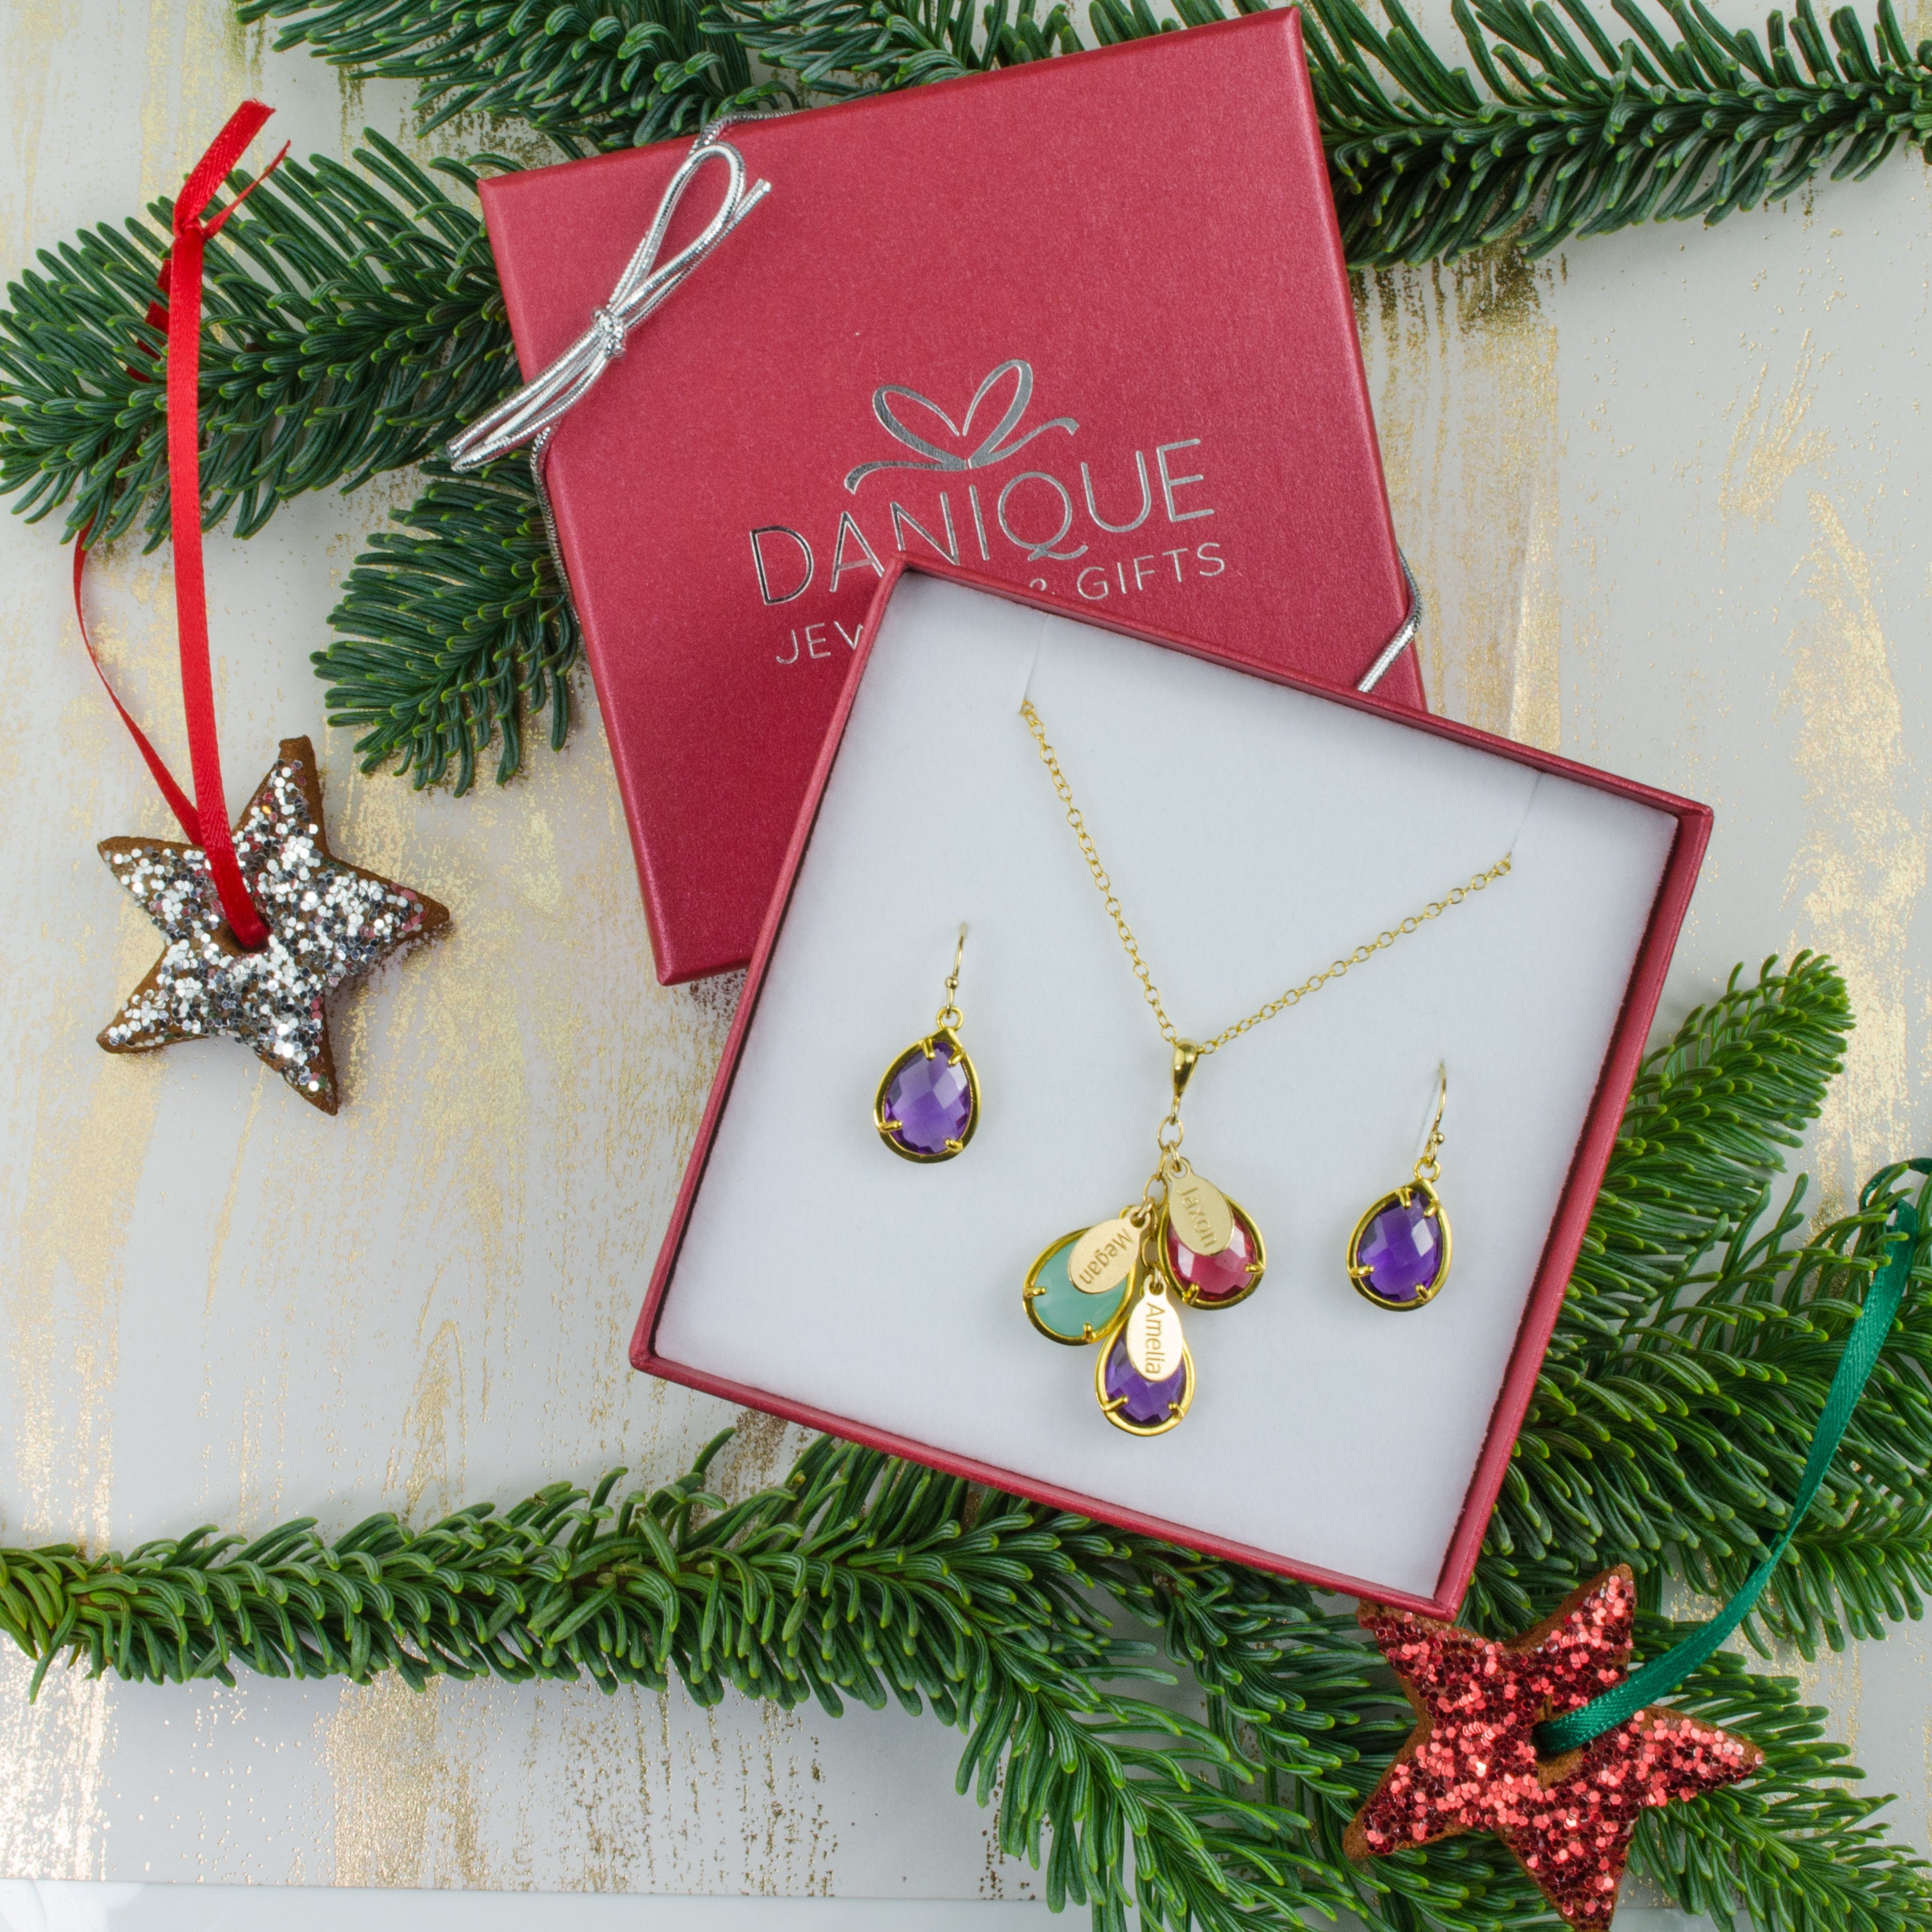 4 DIY Christmas Bell Necklace Crafts for Kids | Brilliant Little Ideas